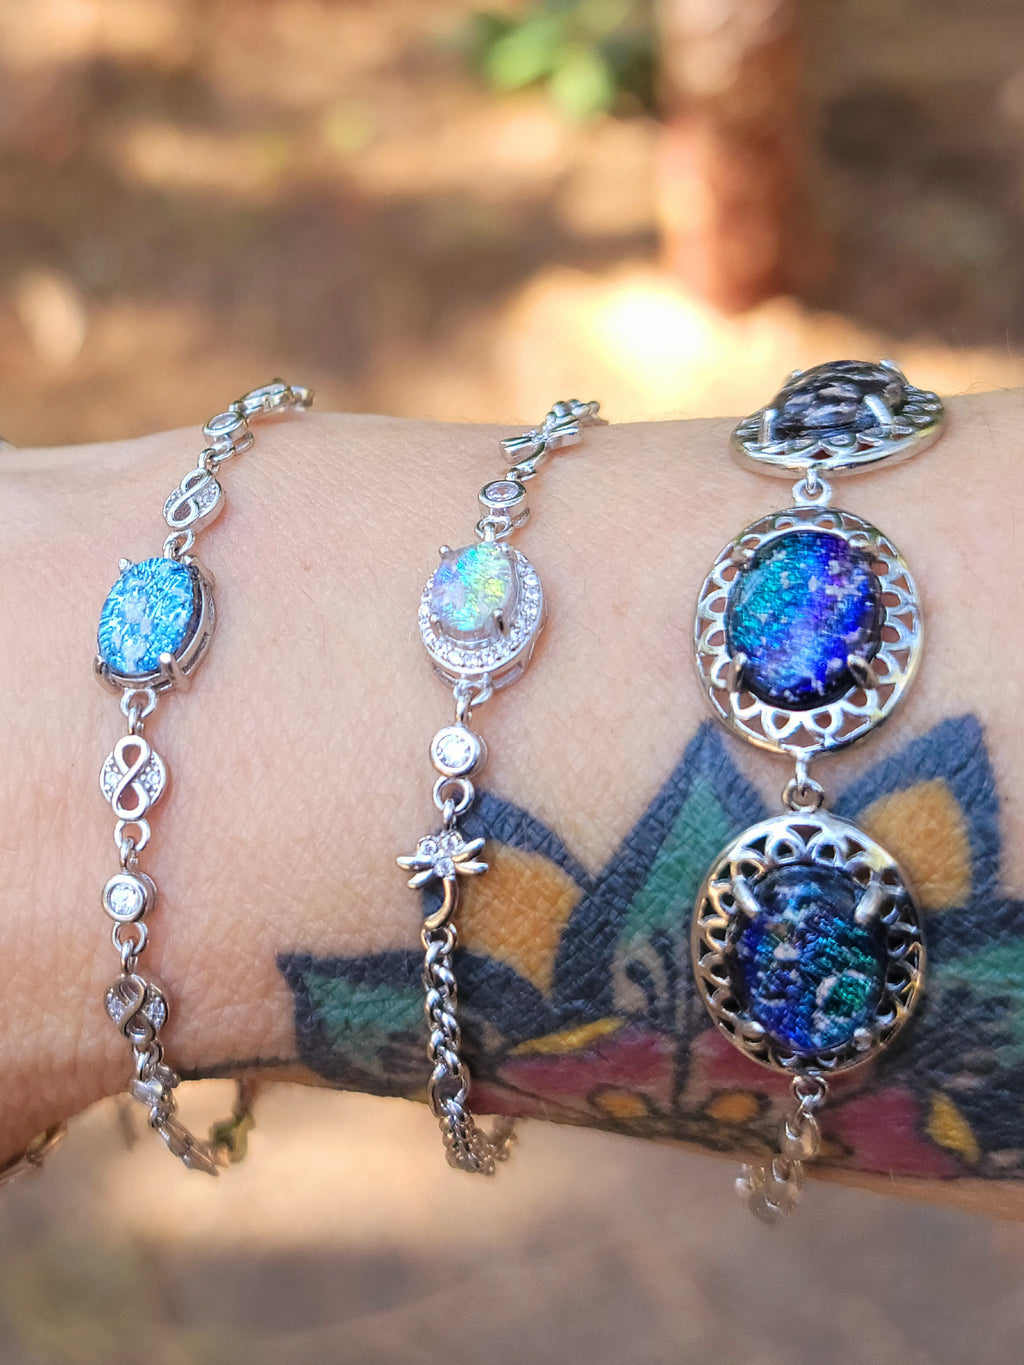 NEW Infinity Cremation Ashes InFused Glass Bracelets Claw Link Sterling Silver Chain CZ Accents